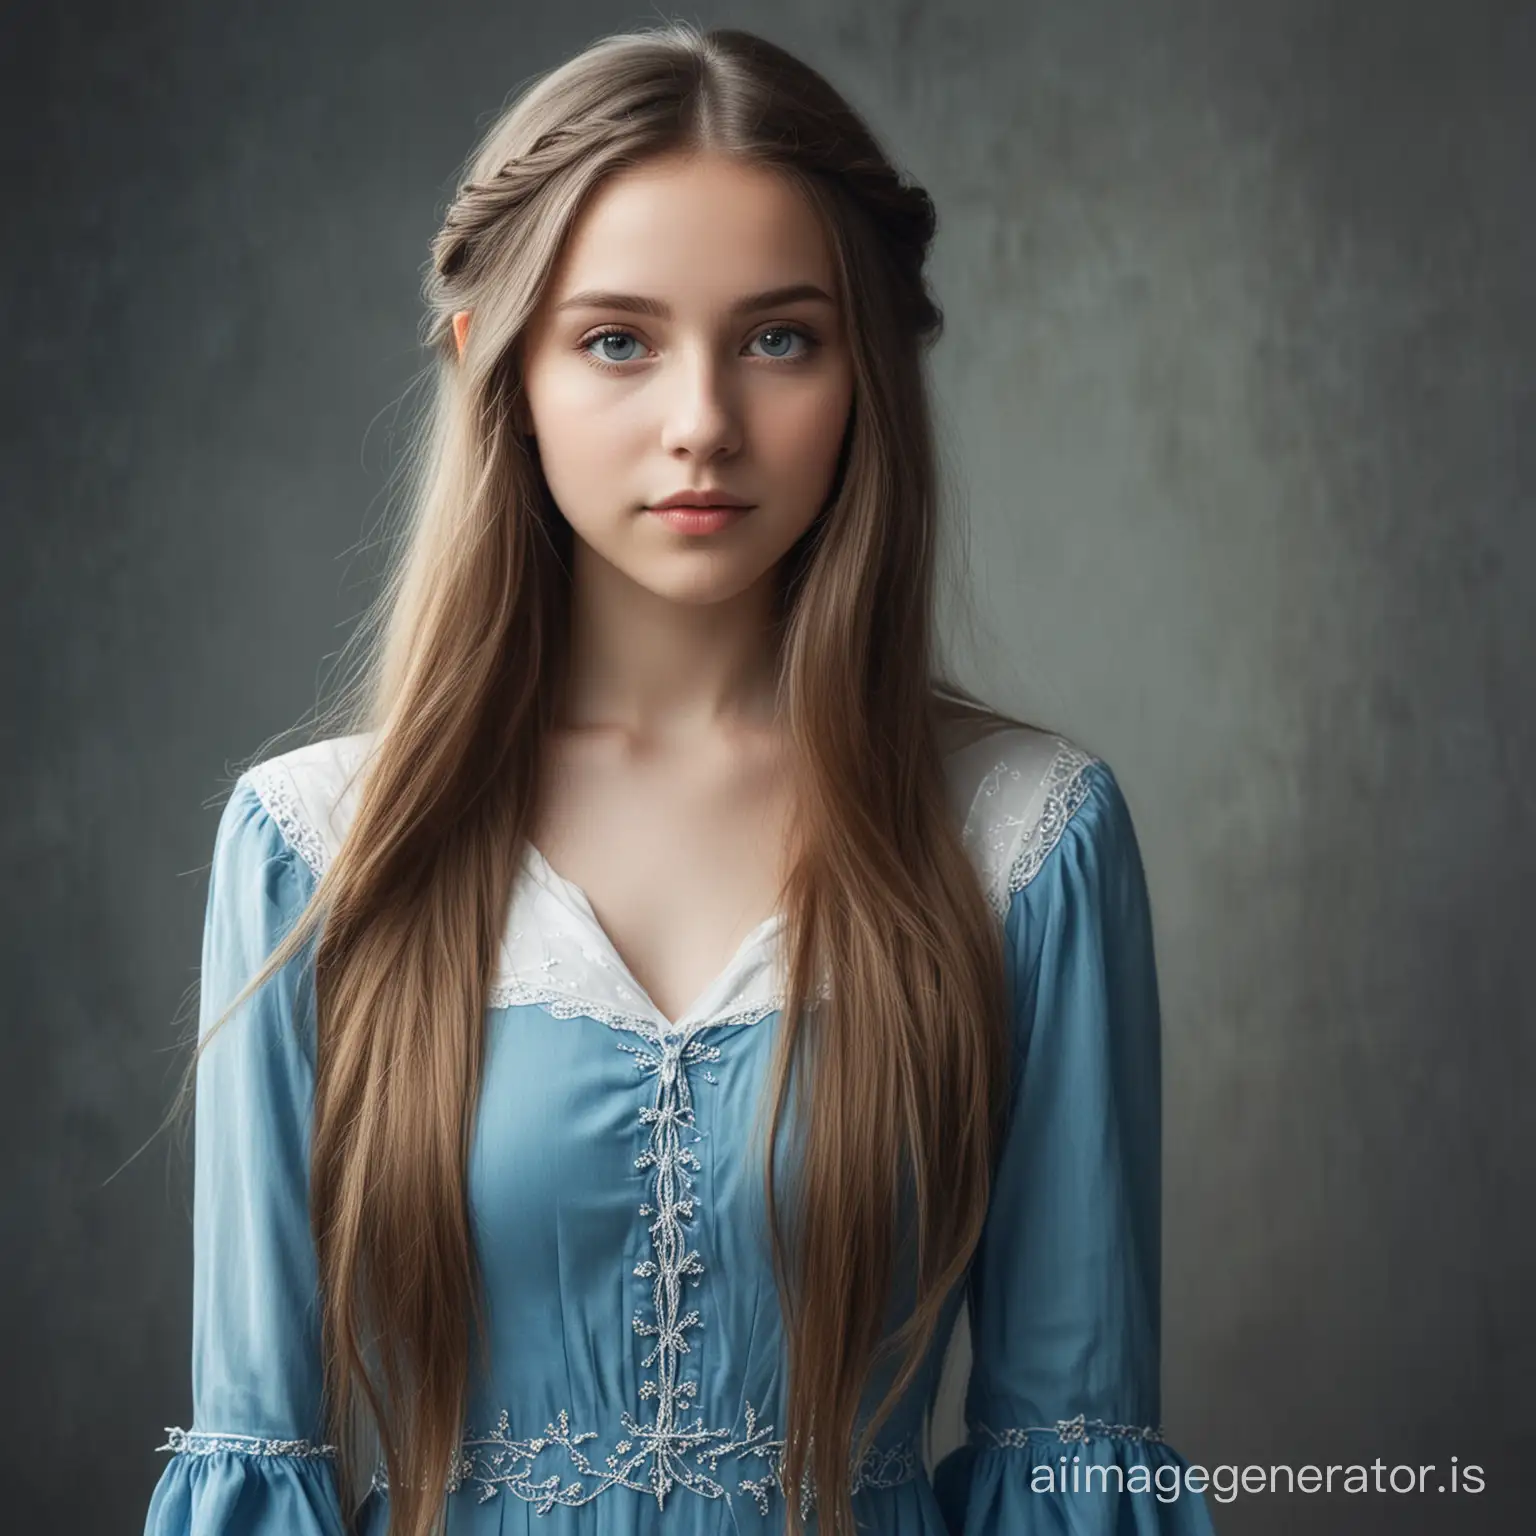 Enchanting-Portrait-of-a-Young-Girl-in-ElvenInspired-Attire